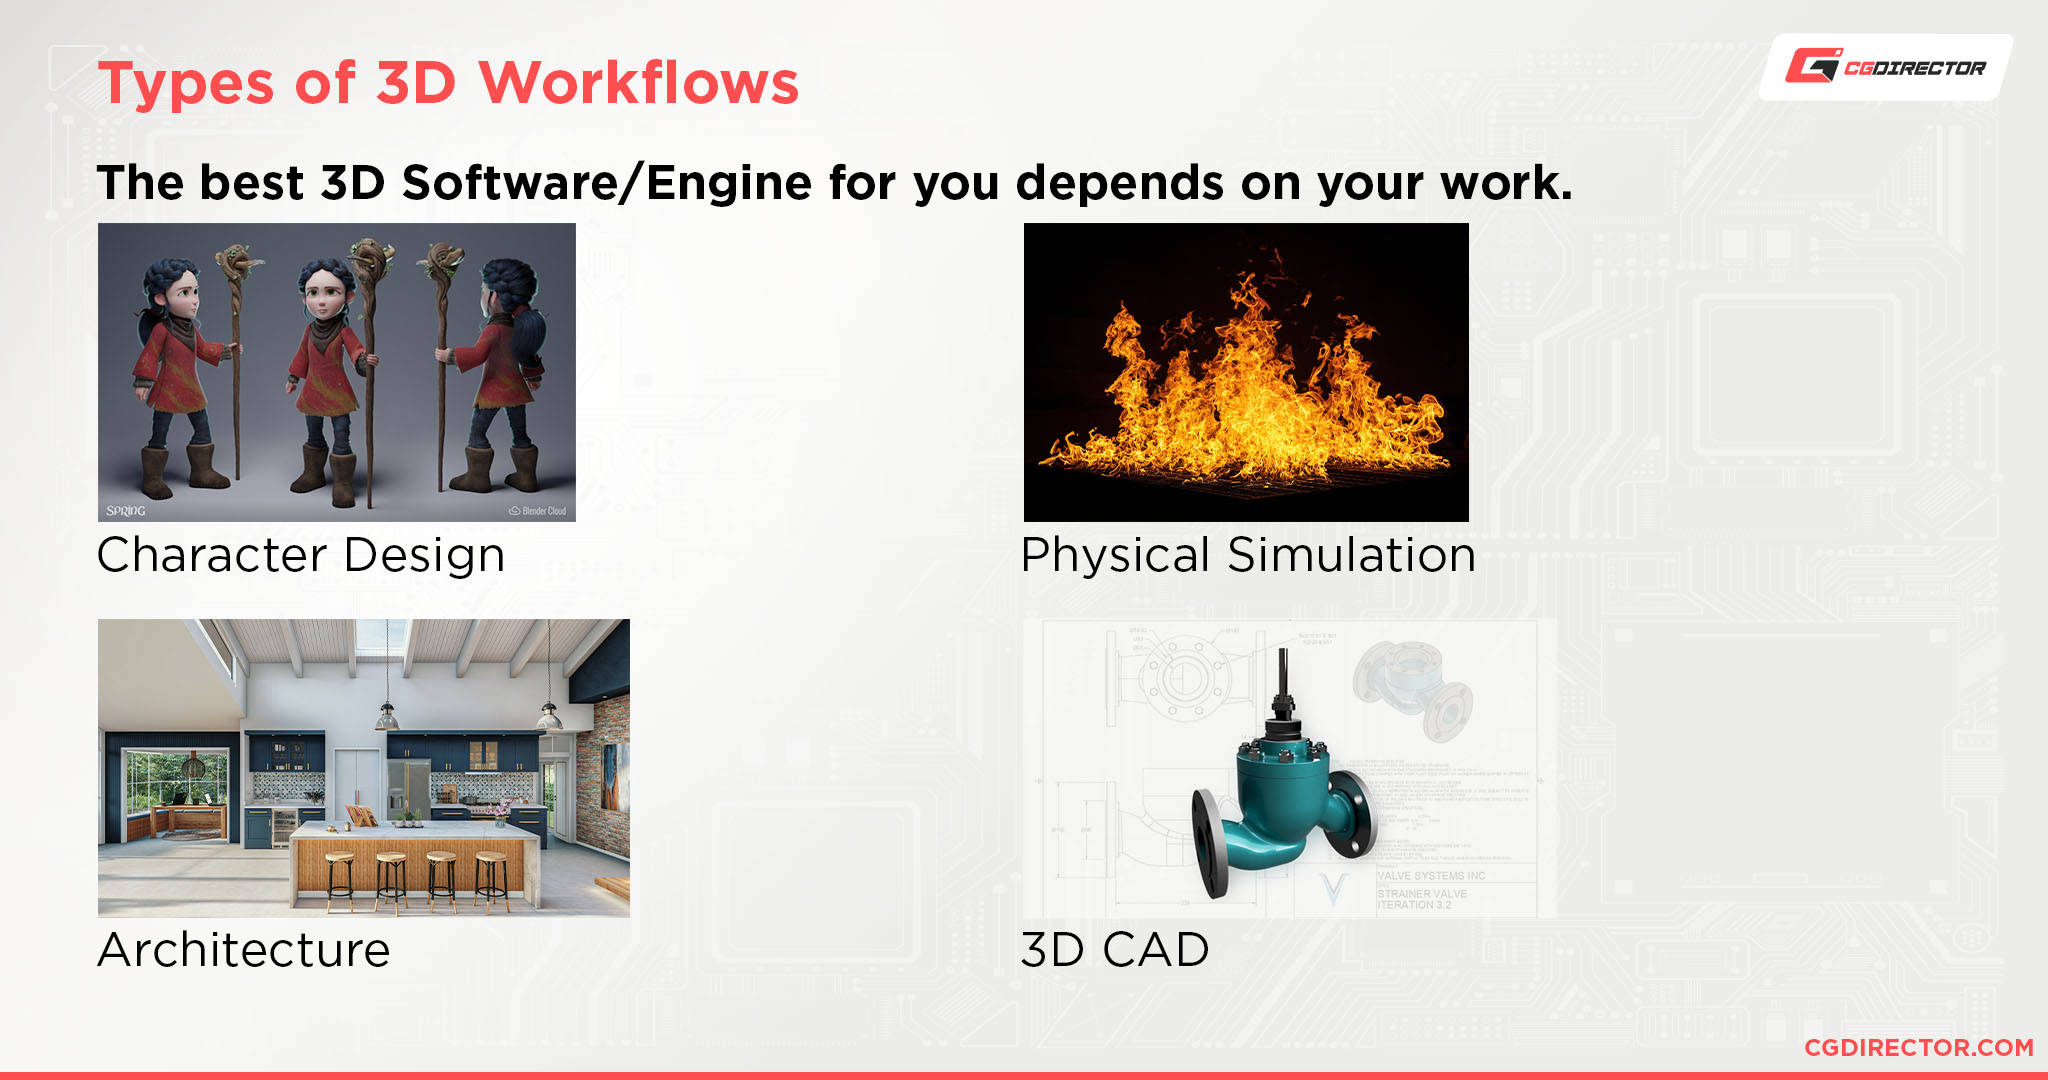 Types of 3D Workflows